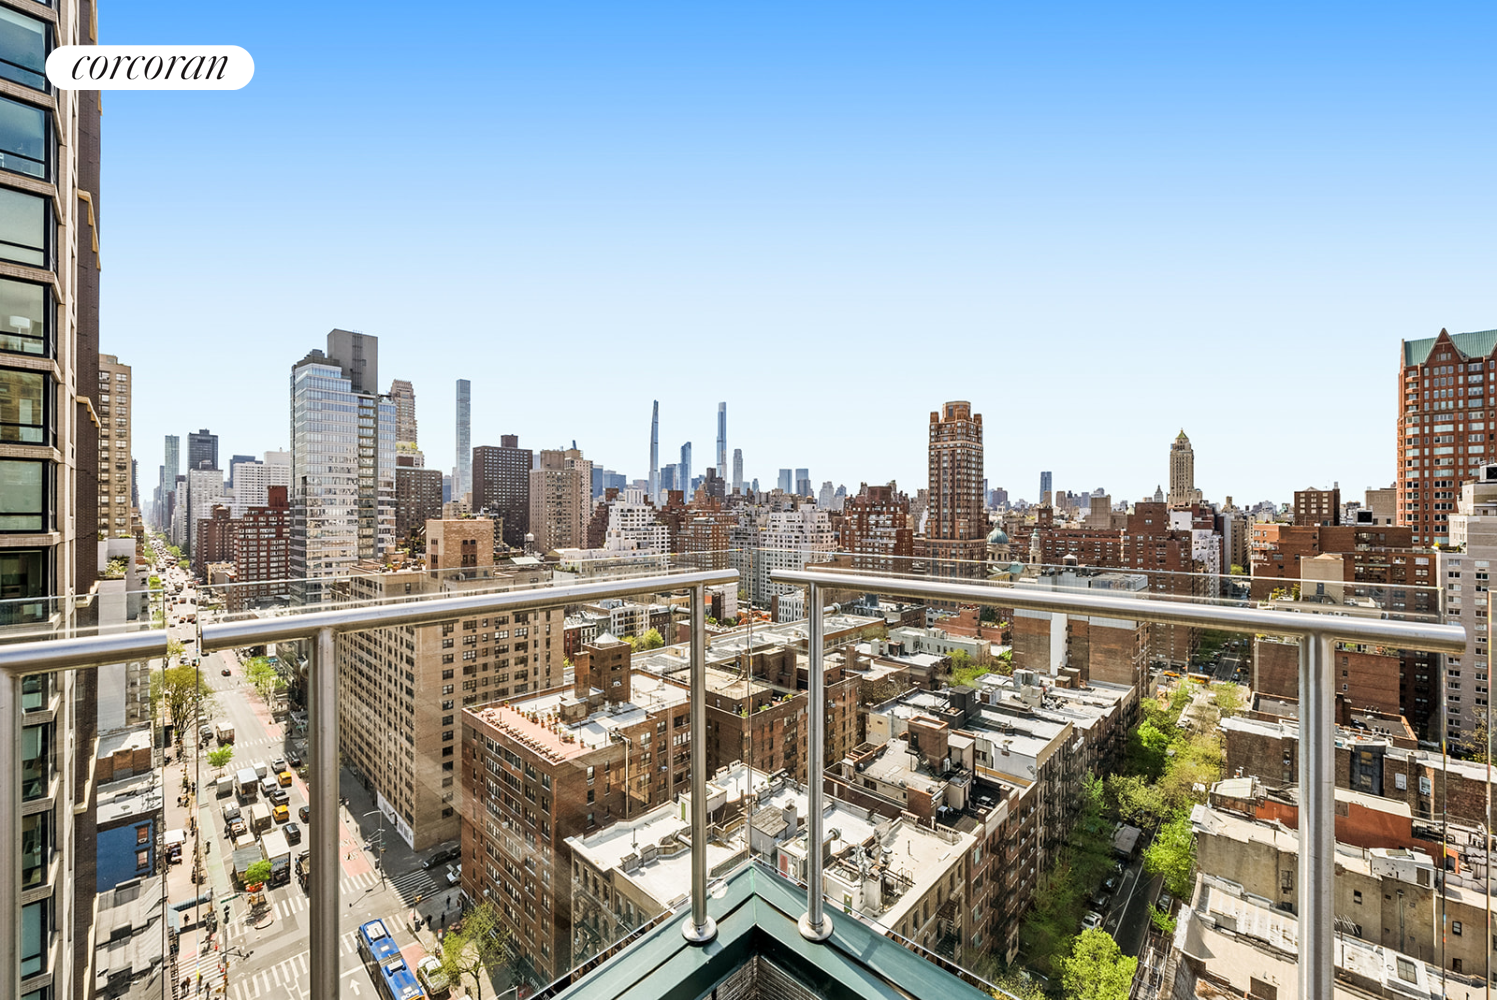 303 East 77th Street Phc, Lenox Hill, Upper East Side, NYC - 2 Bedrooms  
2.5 Bathrooms  
6 Rooms - 